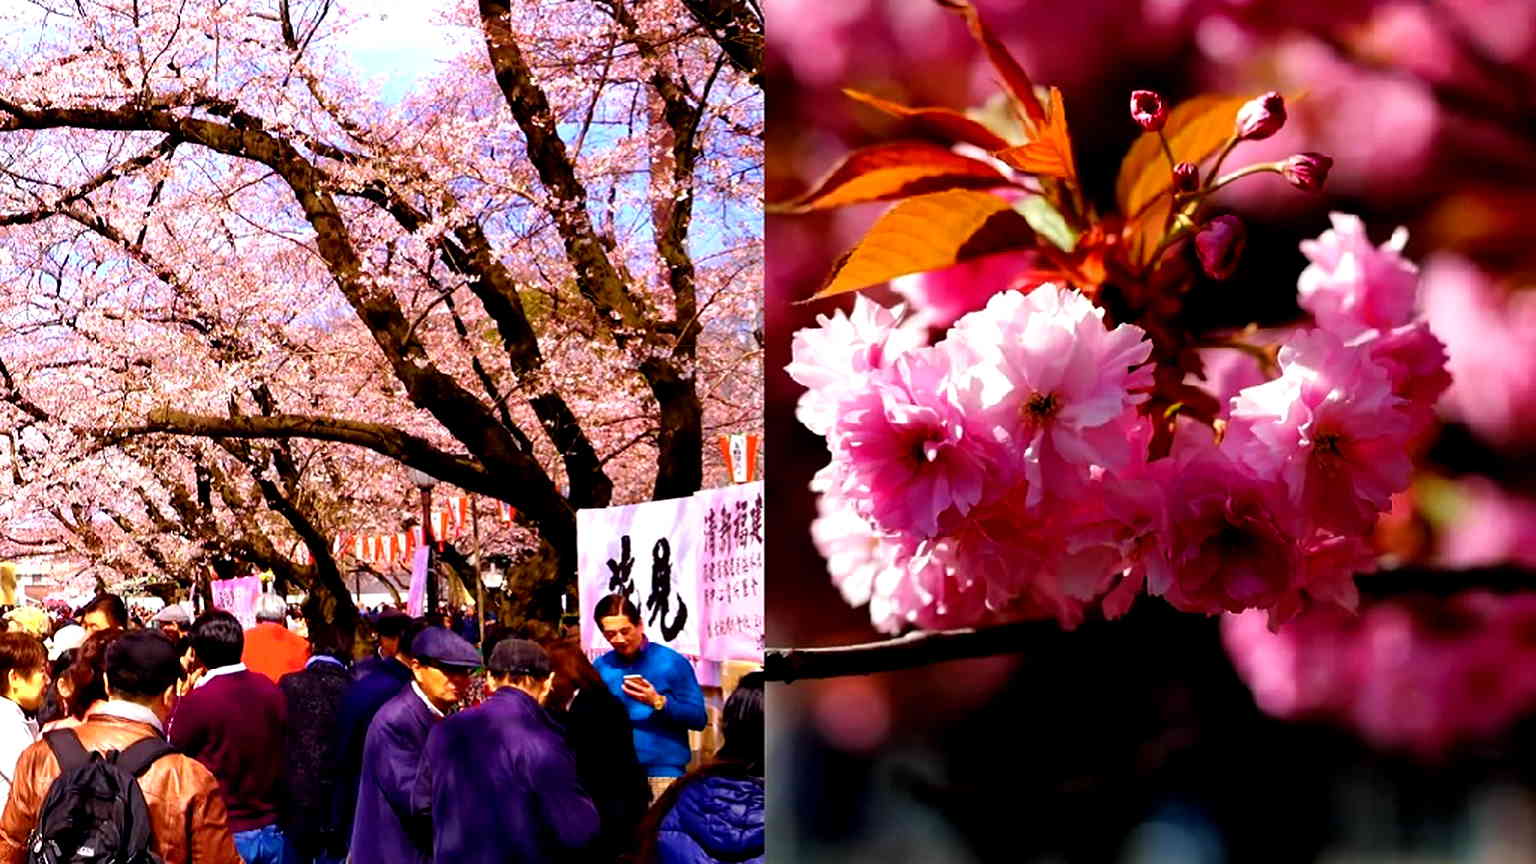 Japan’s most famous cherry blossom trees could disappear due to climate change